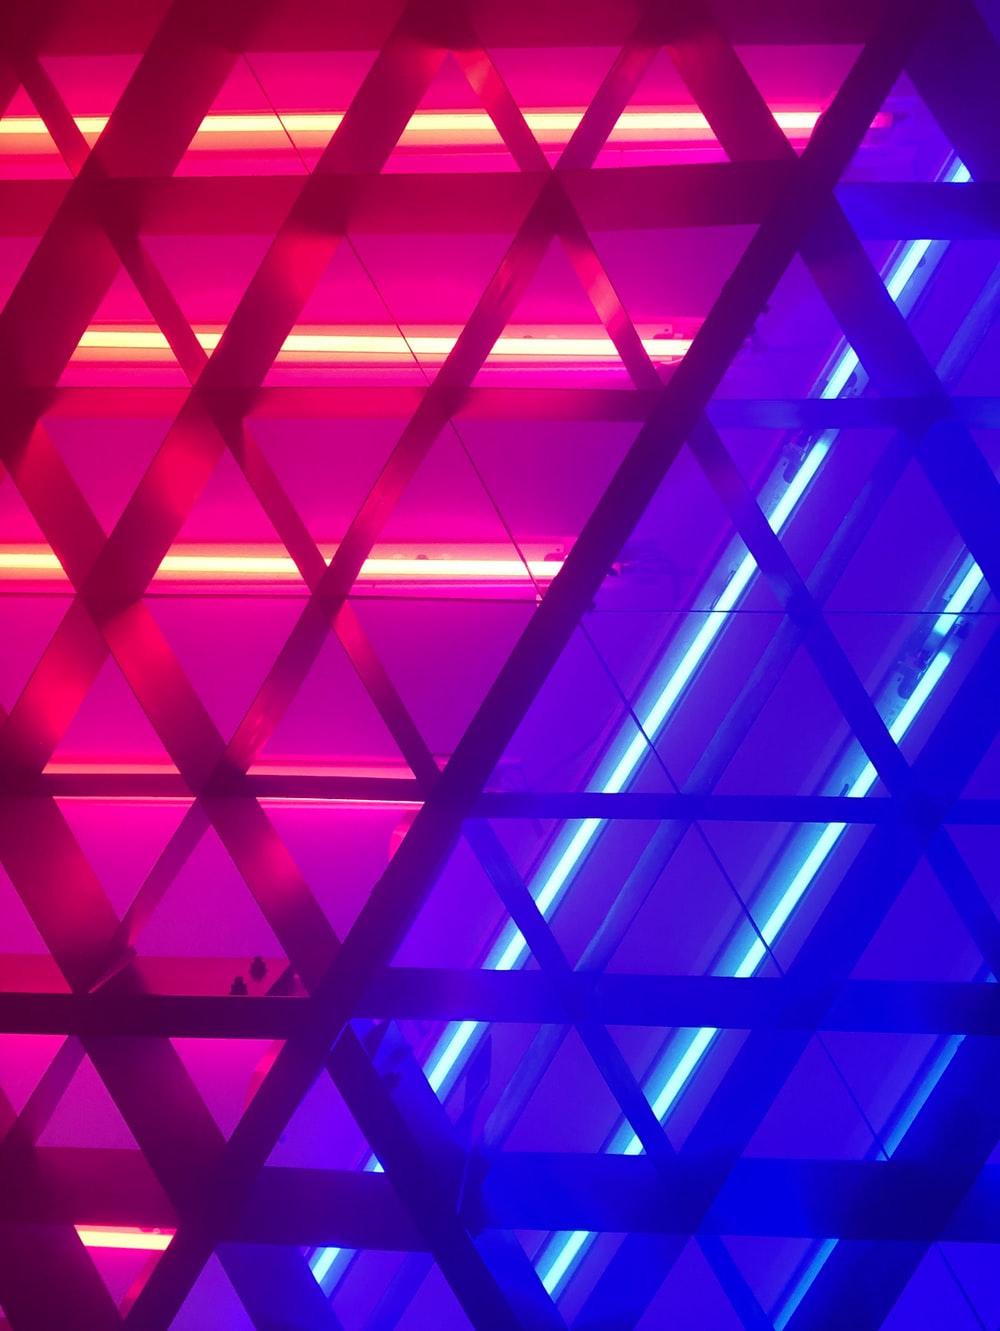  Pink And Blue Neon Pictures Download Free Images on